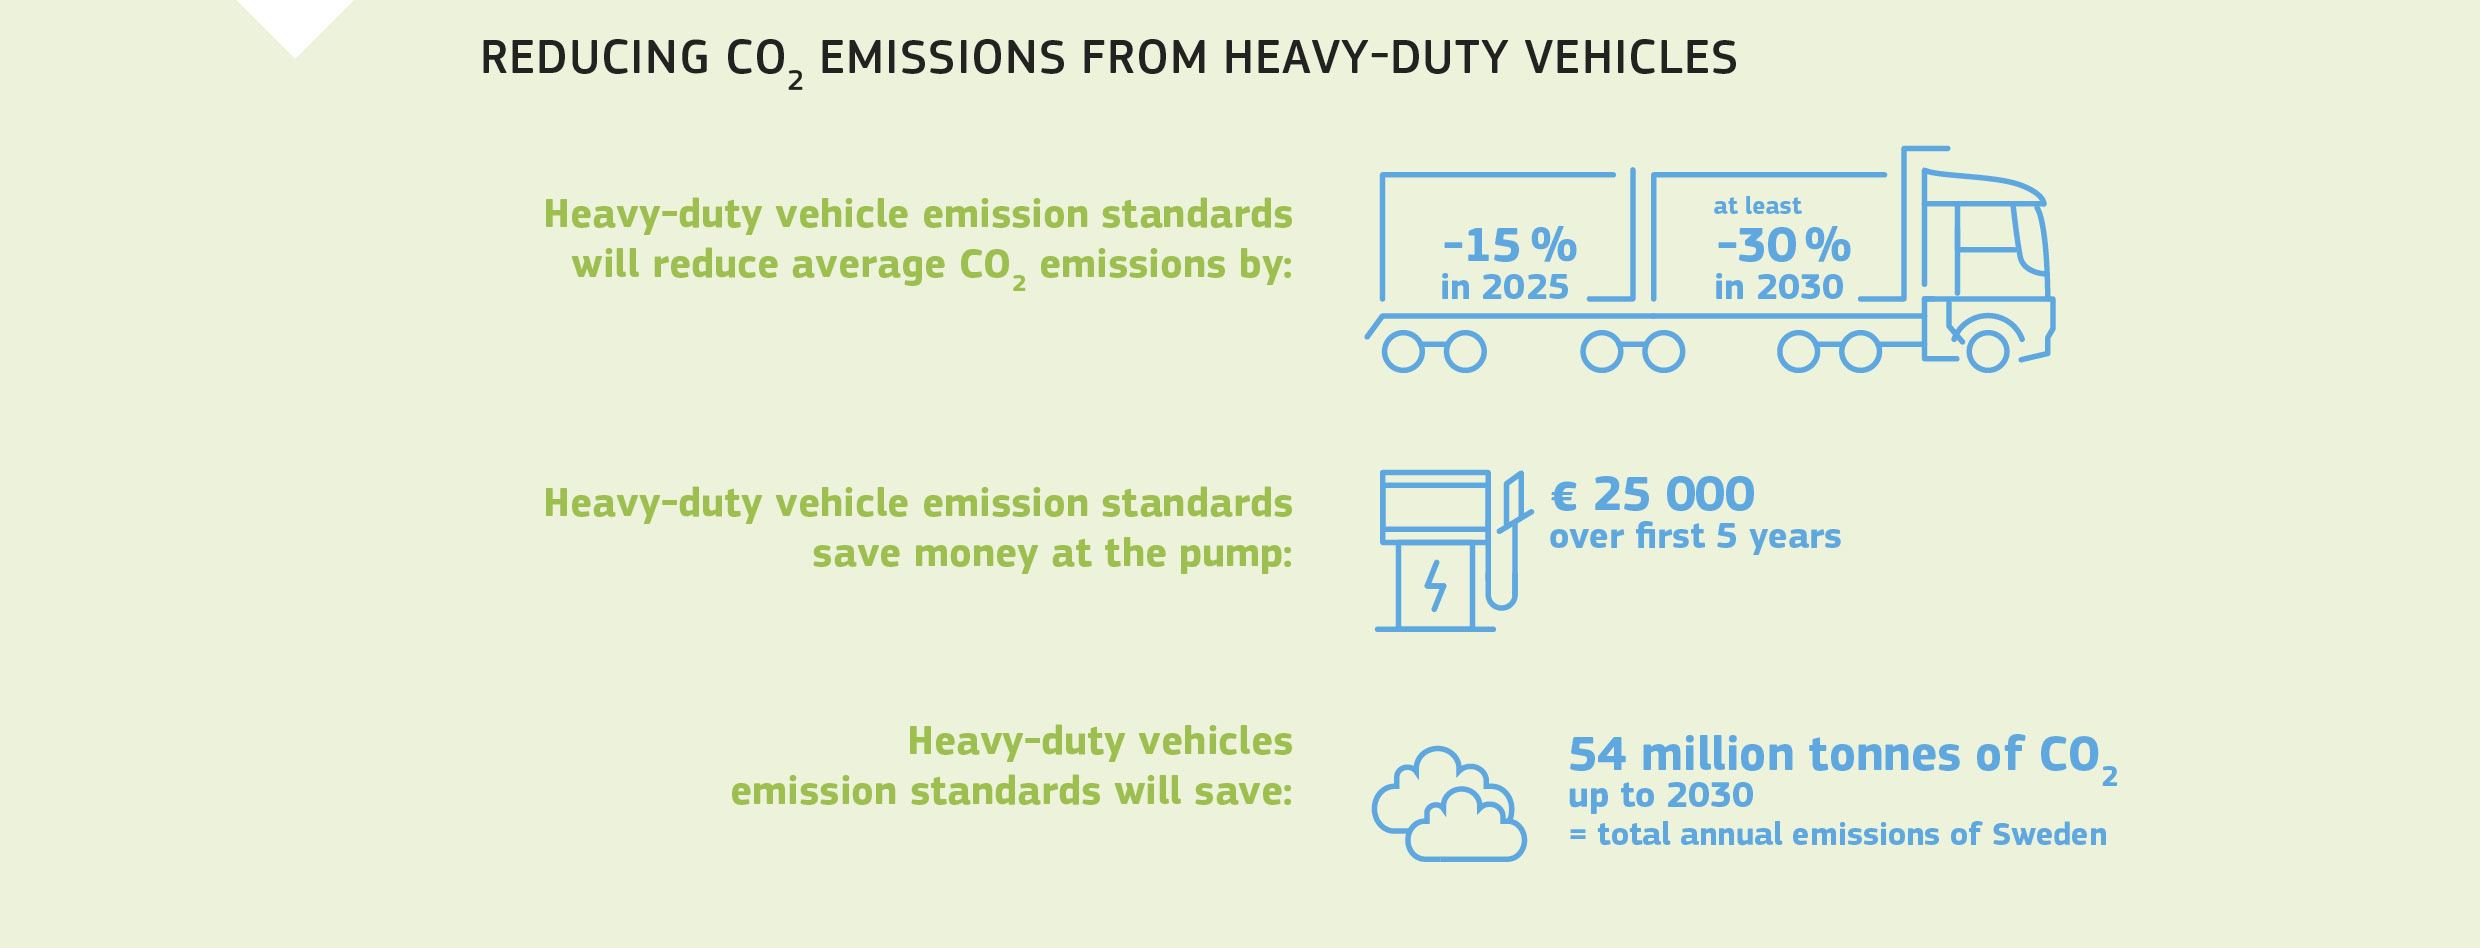 REDUCING CO2 EMISSIONS FROM HEAVY-DUTY VEHICLES